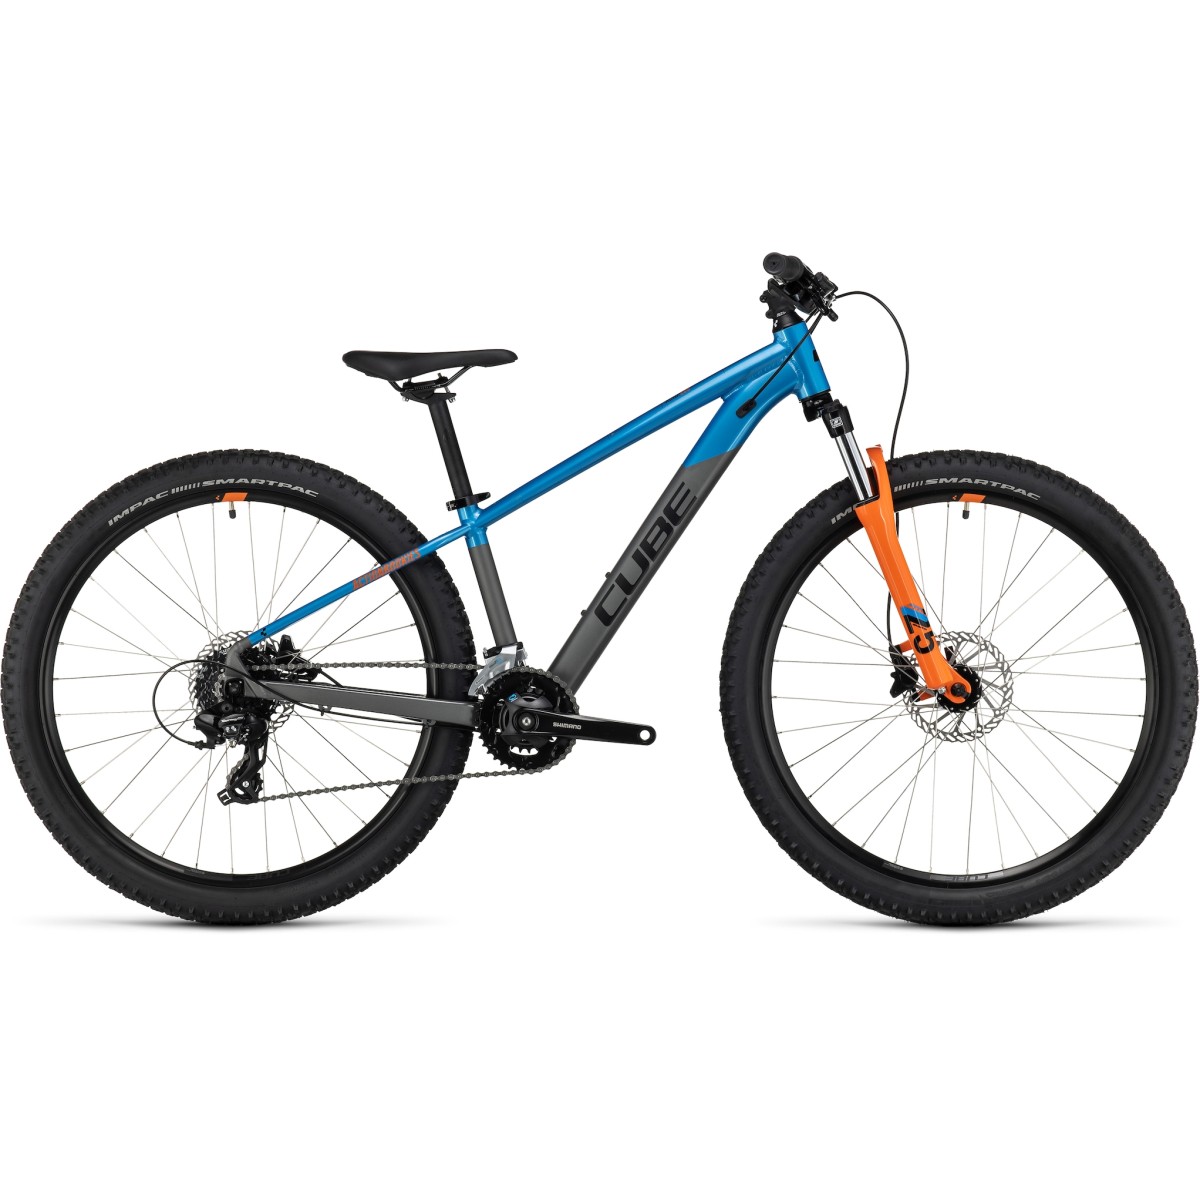 CUBE ACID 260 DISC kids bicycle - actionteam - 2023